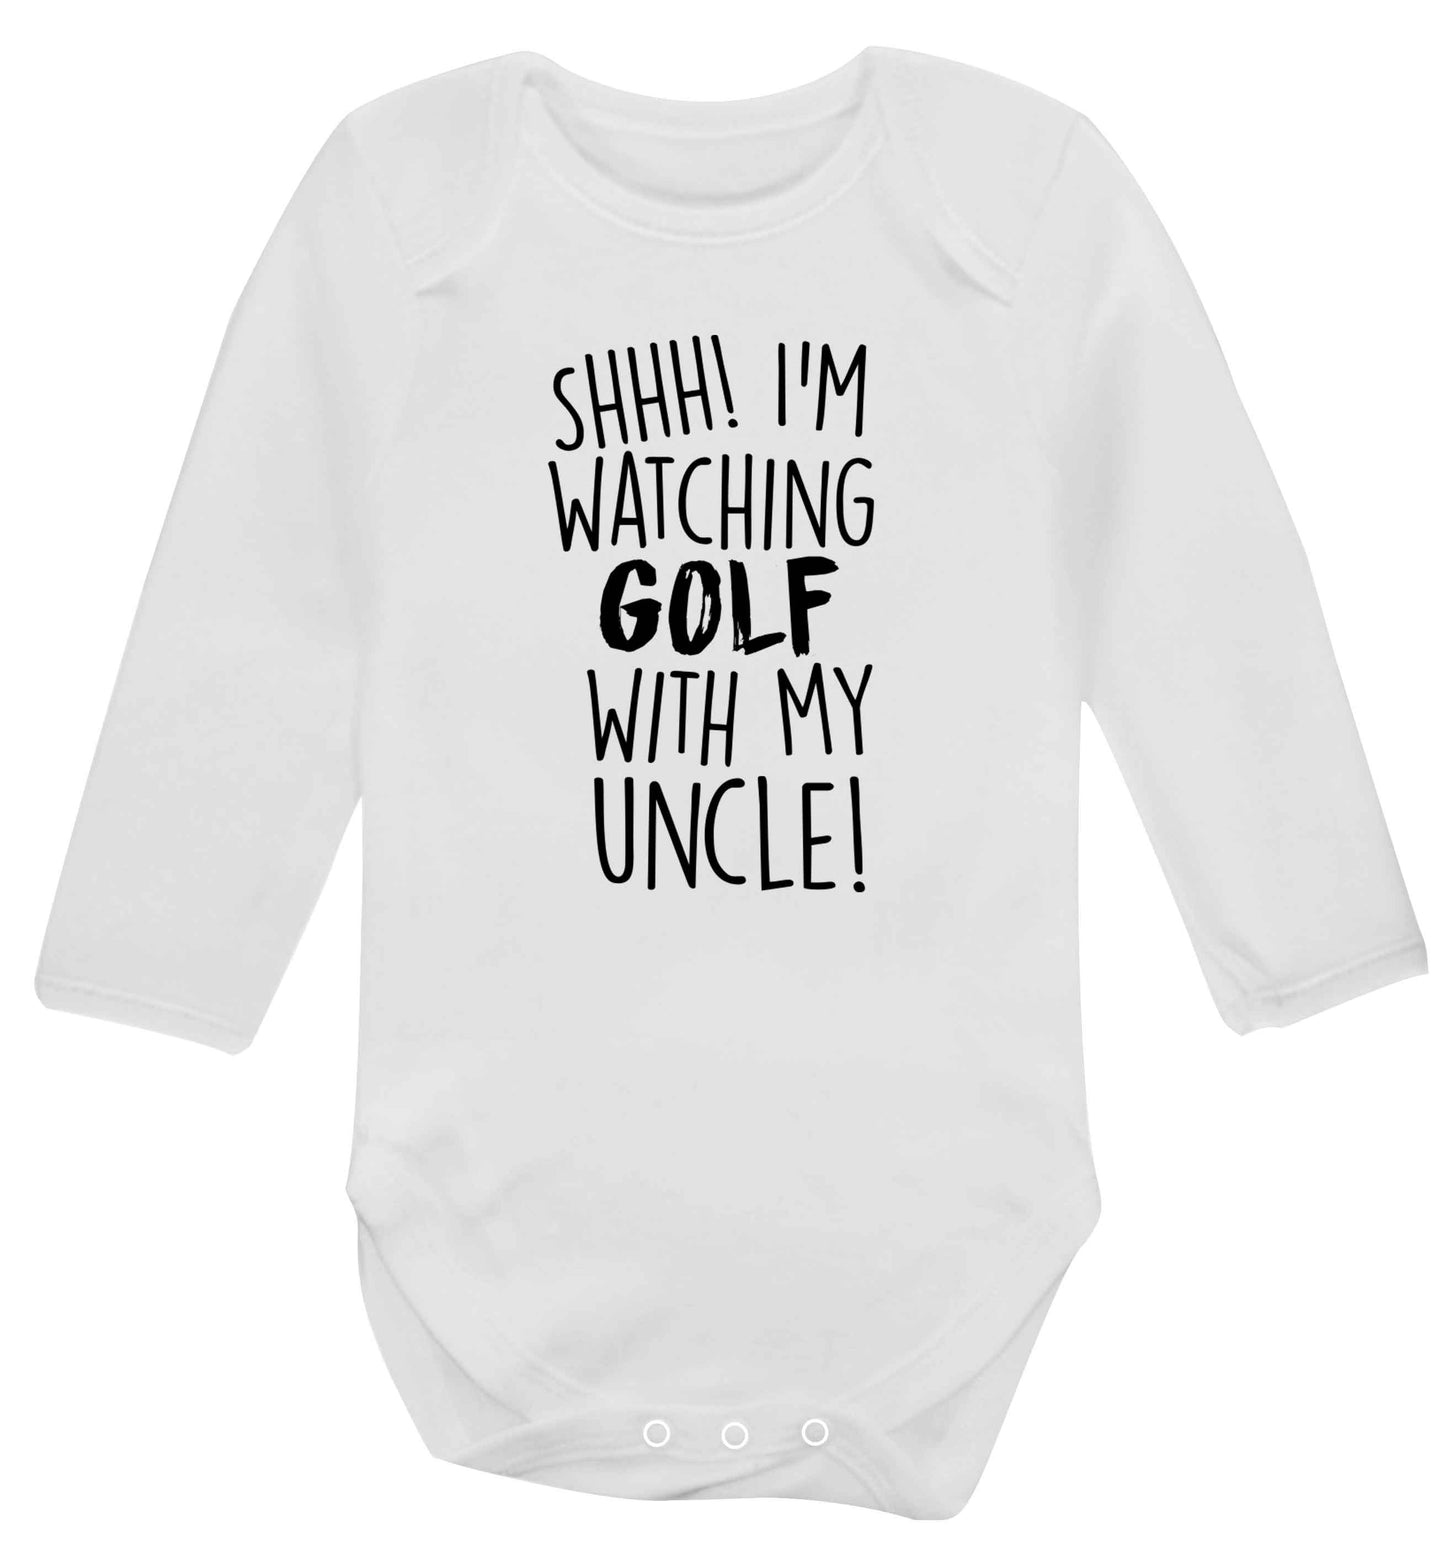 Shh I'm watching golf with my uncle Baby Vest long sleeved white 6-12 months